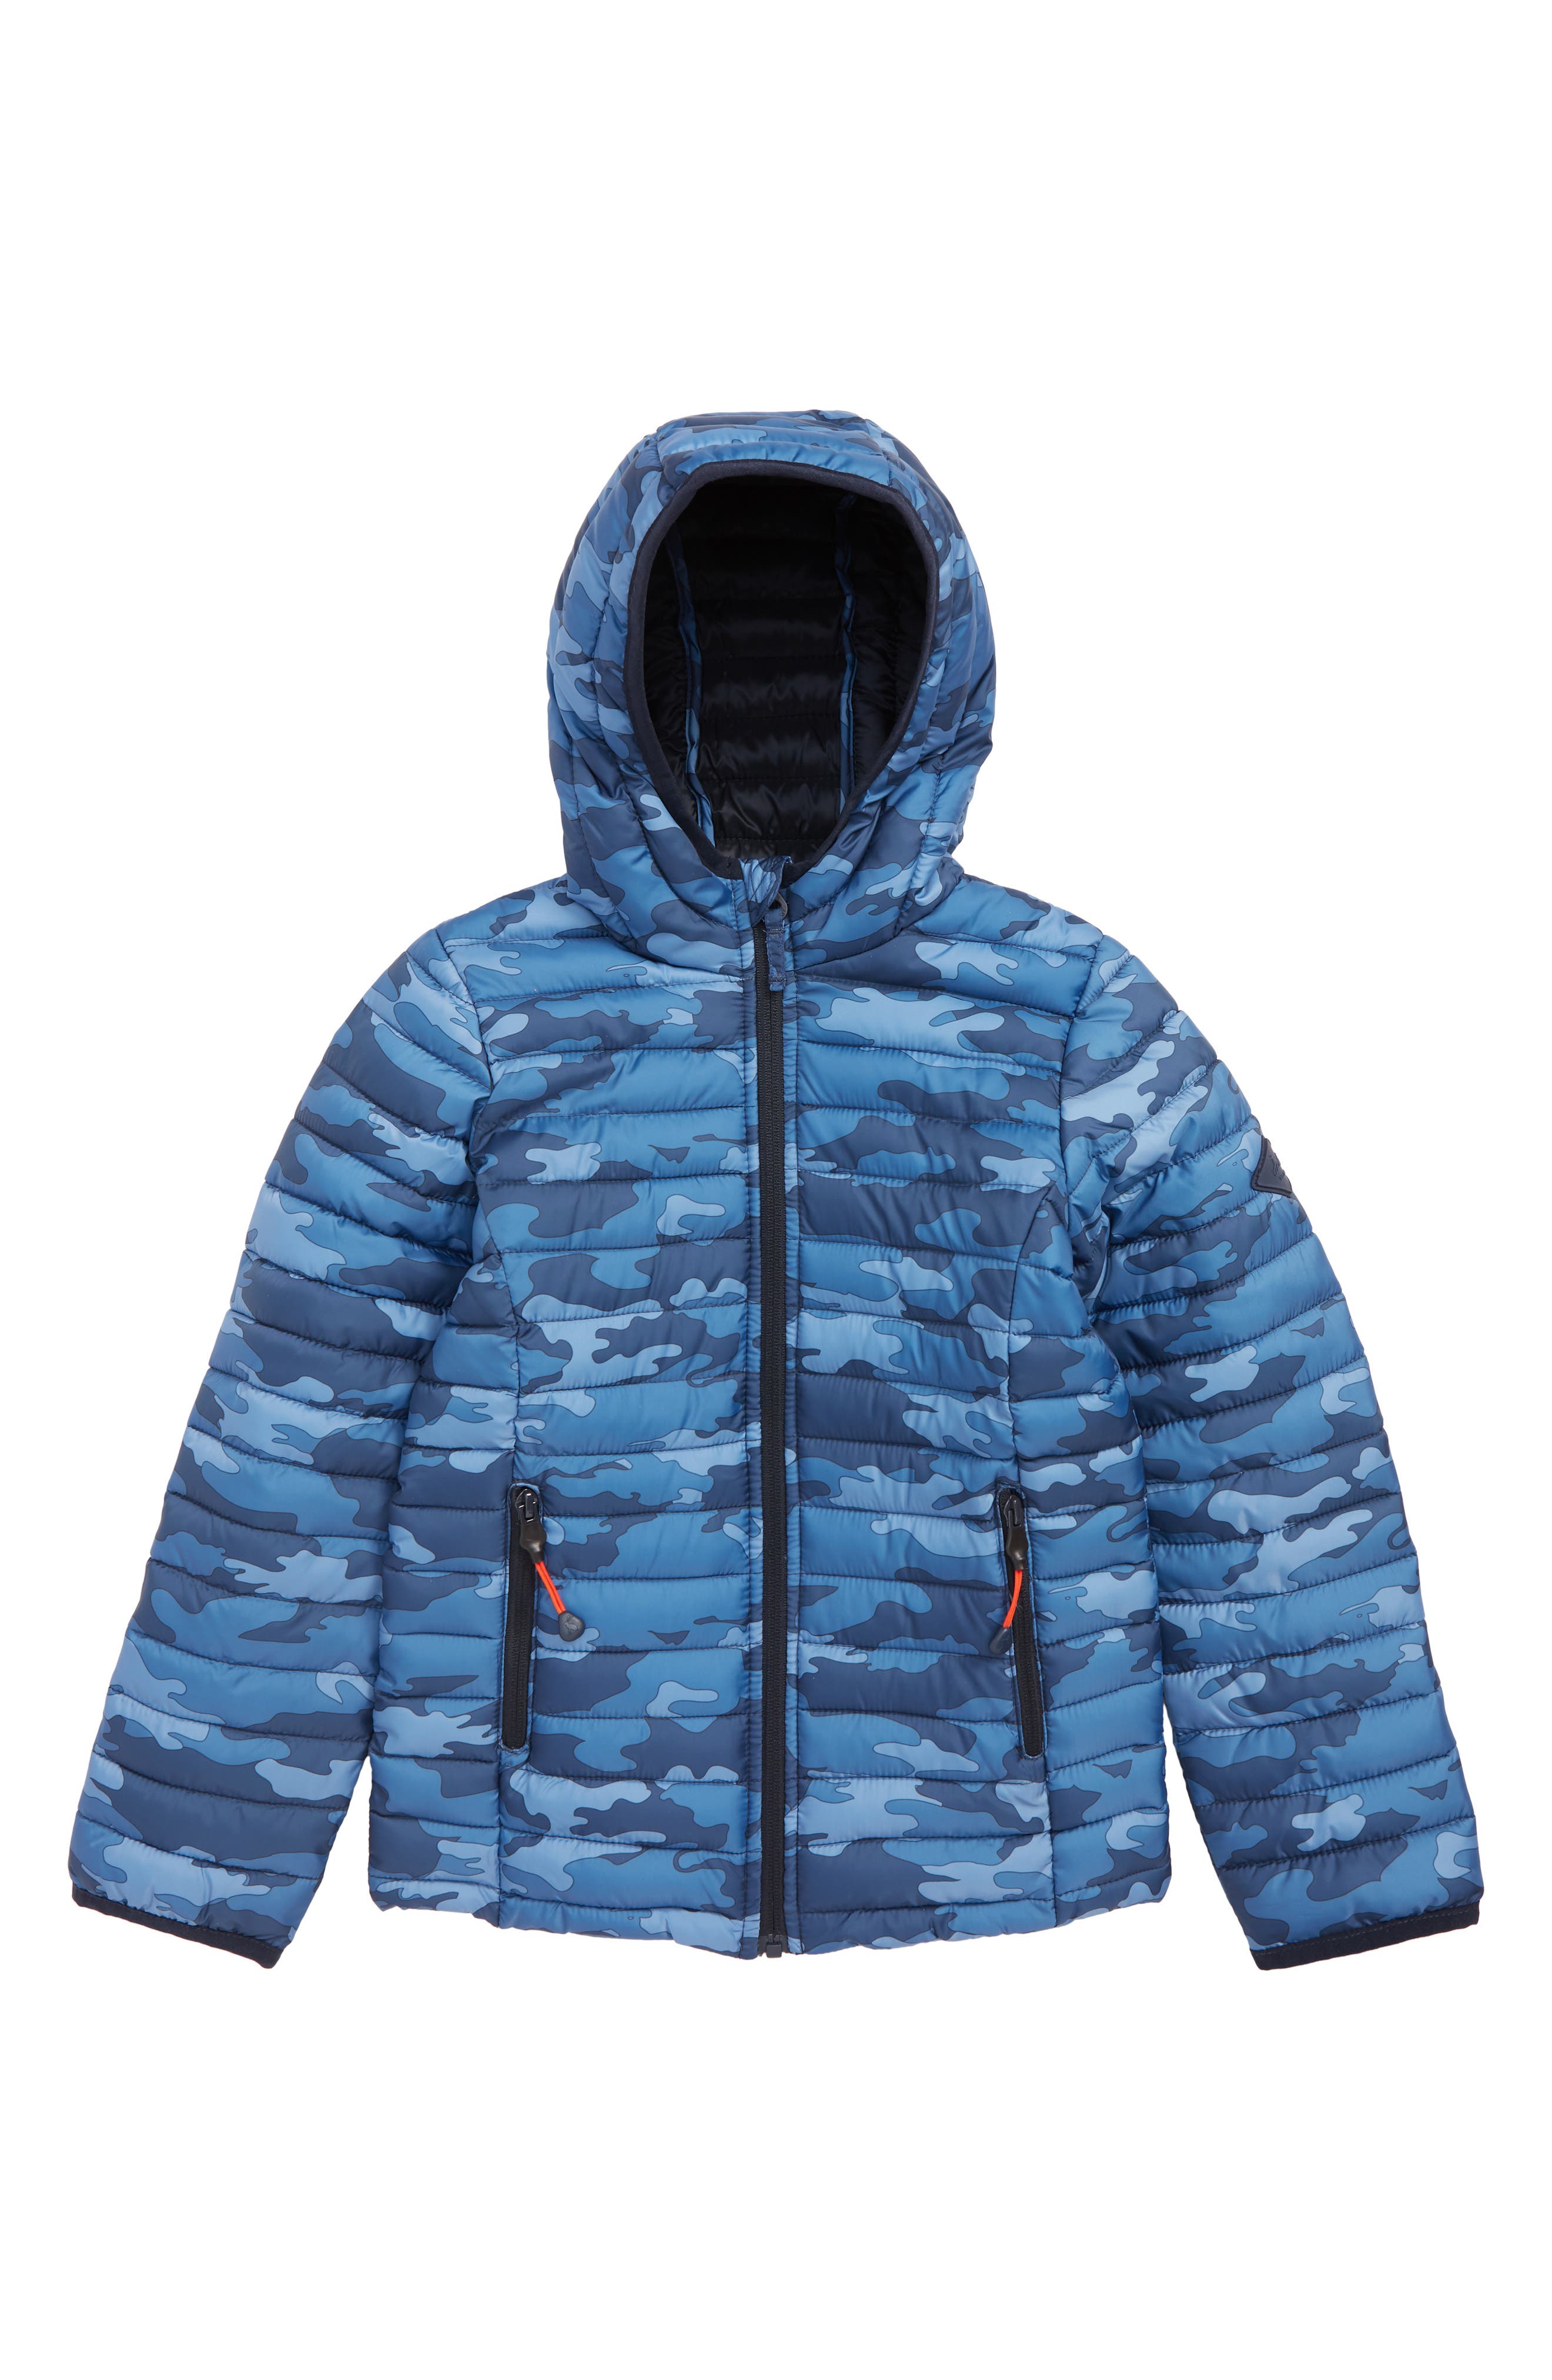 UPC 020324000050 - Boy's Joules Cairn Camo Water Resistant Puffer ...